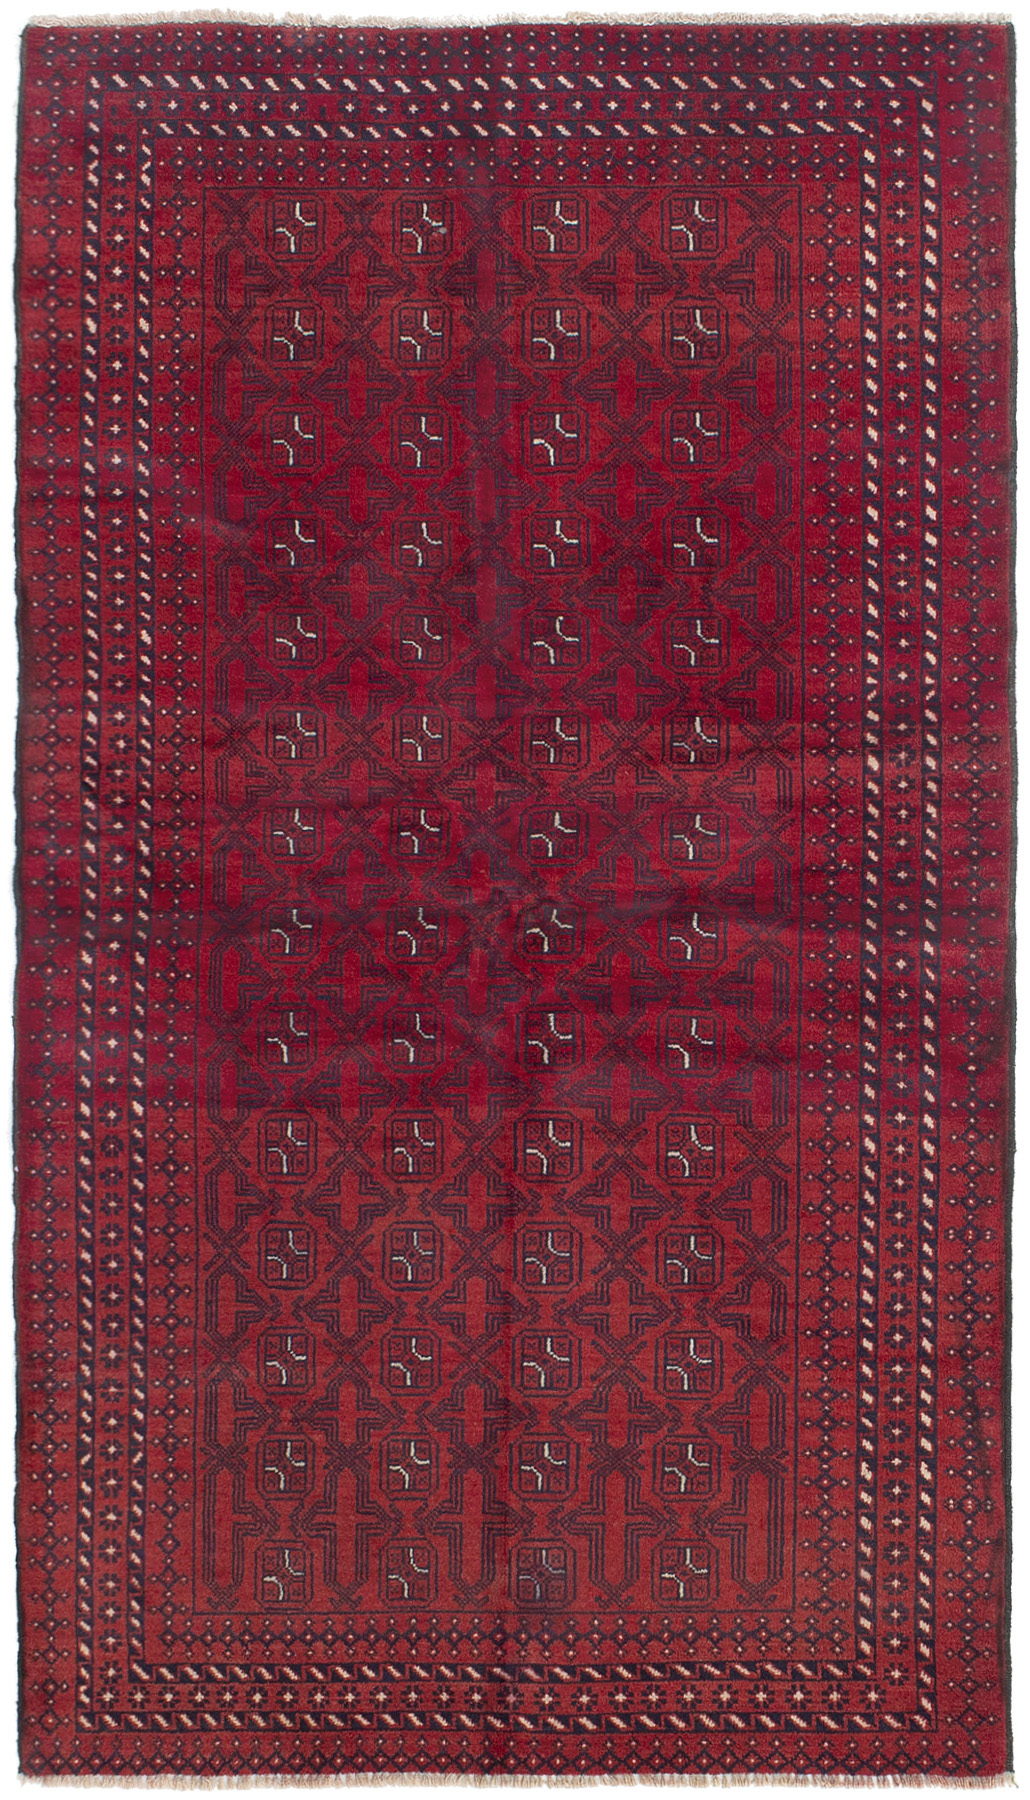 Hand-knotted Rizbaft Red Wool Rug 3'7" x 6'6"  Size: 3'7" x 6'6"  